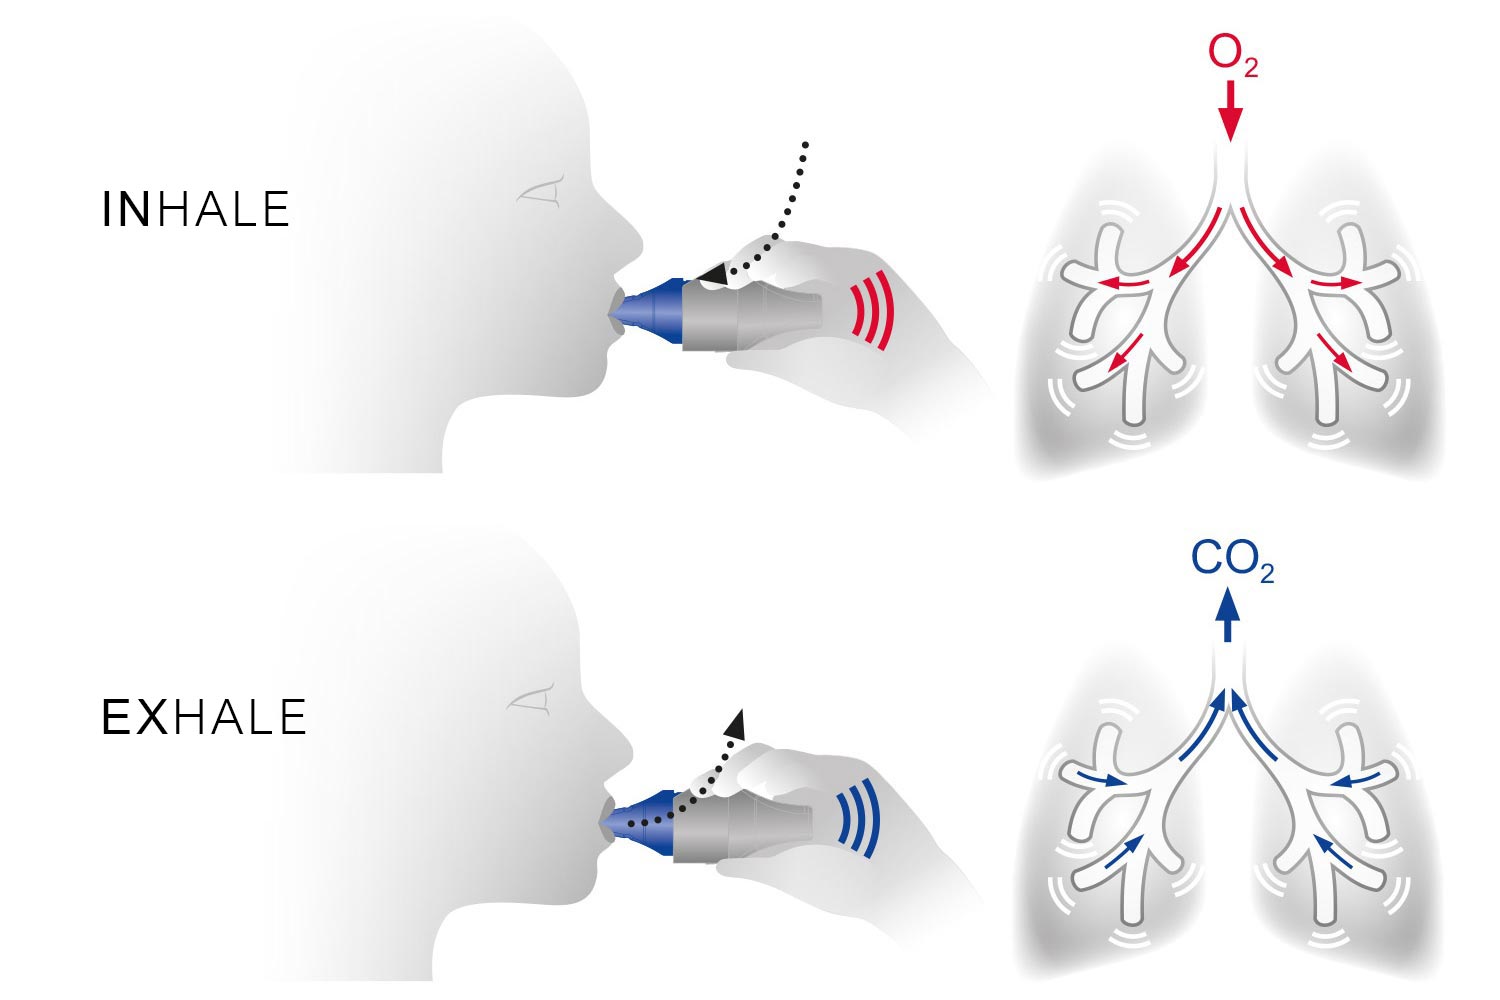 Recommended use of oscillating exhalation therapy and inhalation training